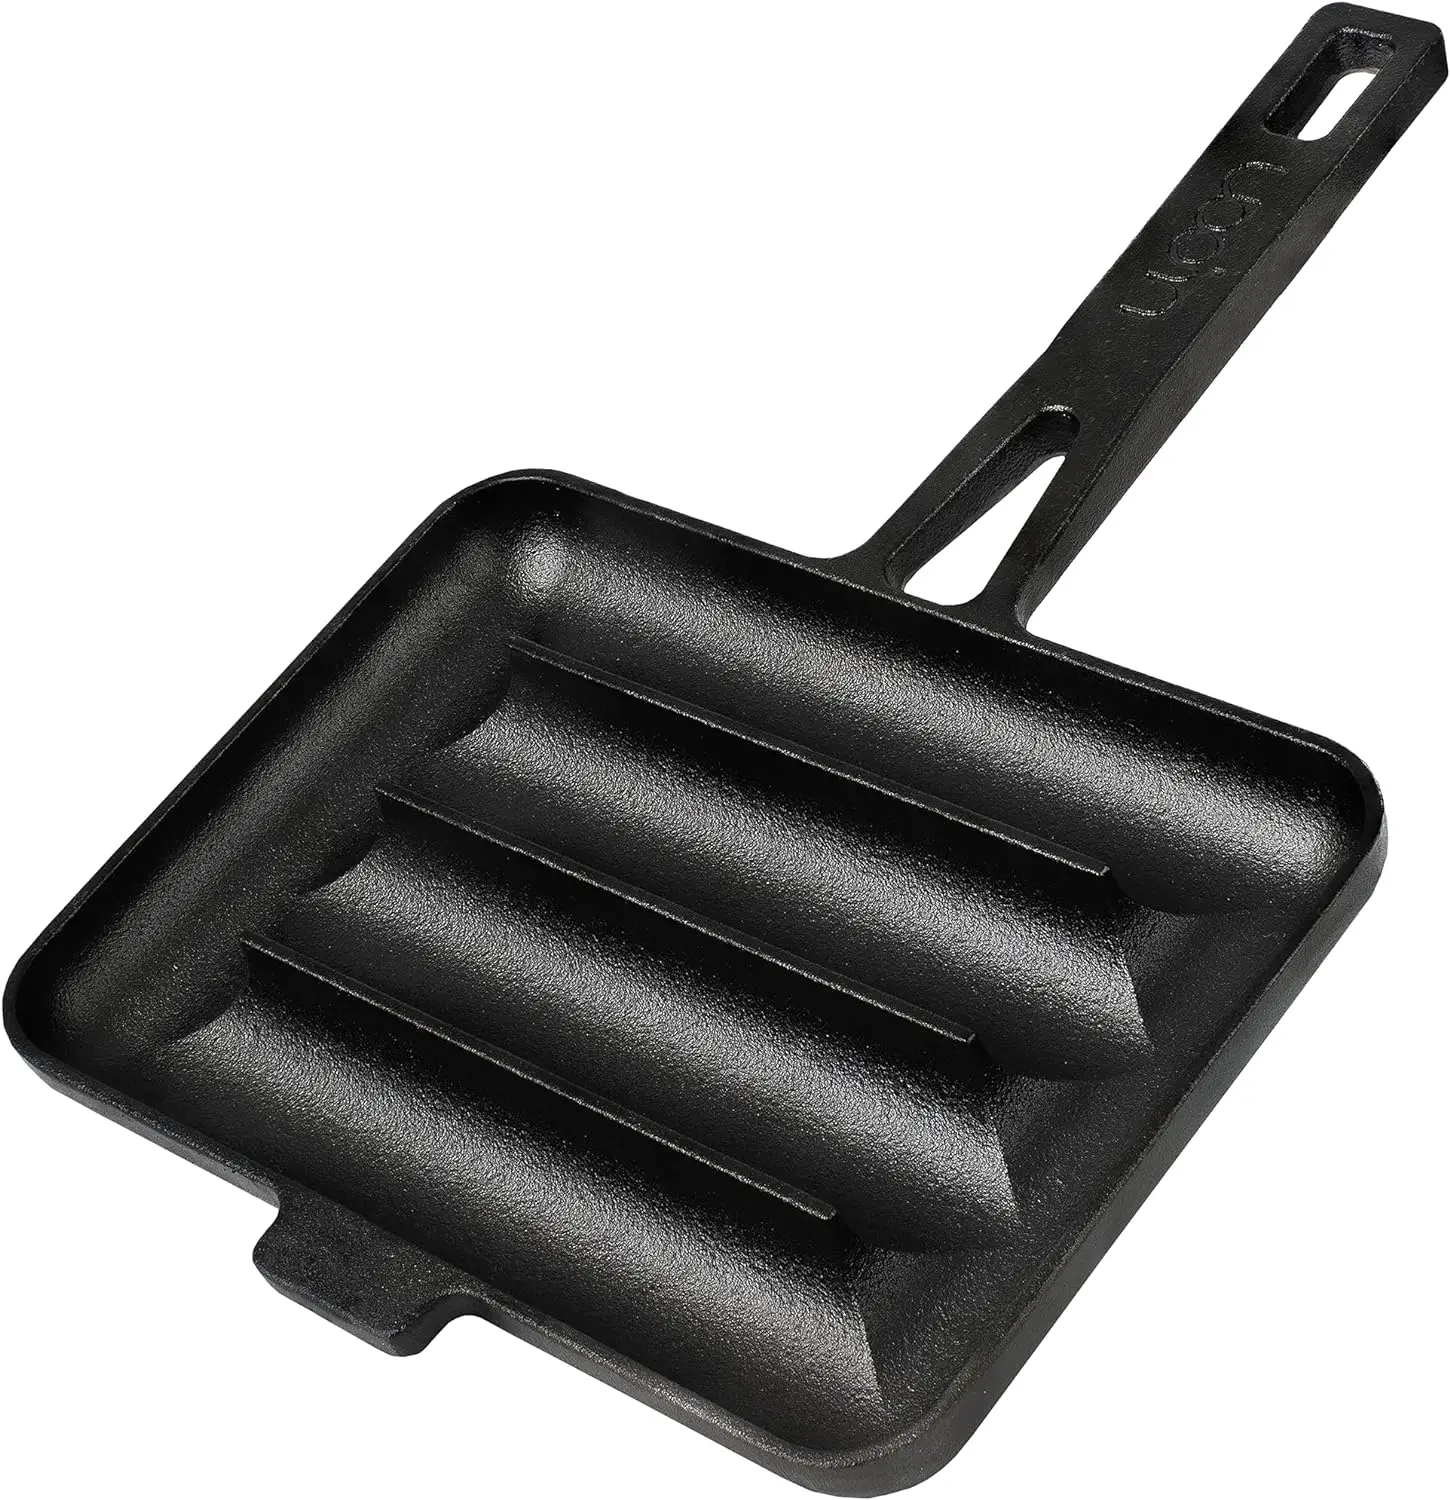 

Cast Iron Sausage Pan - Pre Seasoned Square Grill Pan for Kitchen and Outdoor Use. Air fryer liner Baking tray for oven Baking a